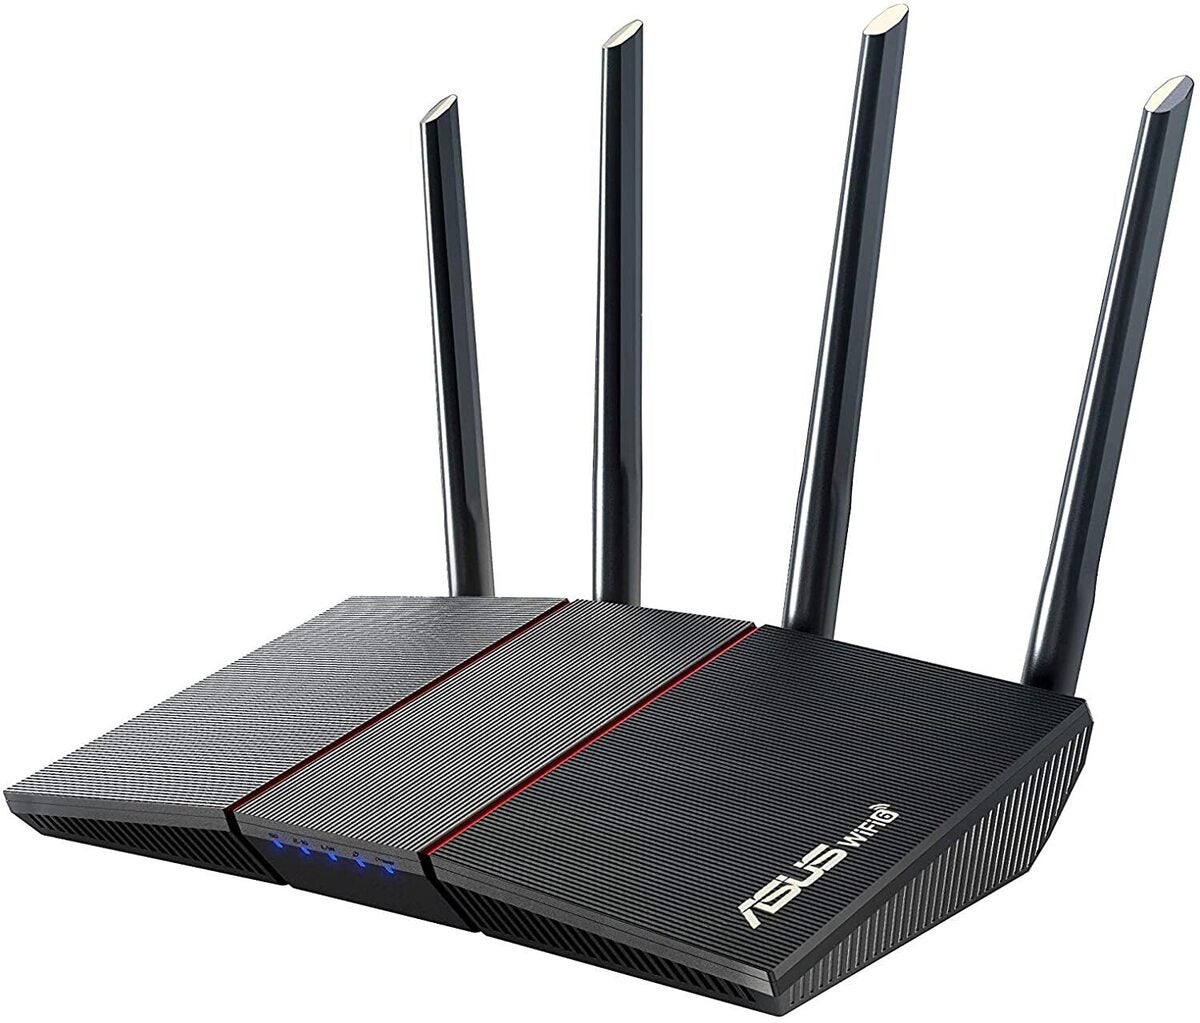 Refusal exit sew The best router settings for gaming - PC World Australia